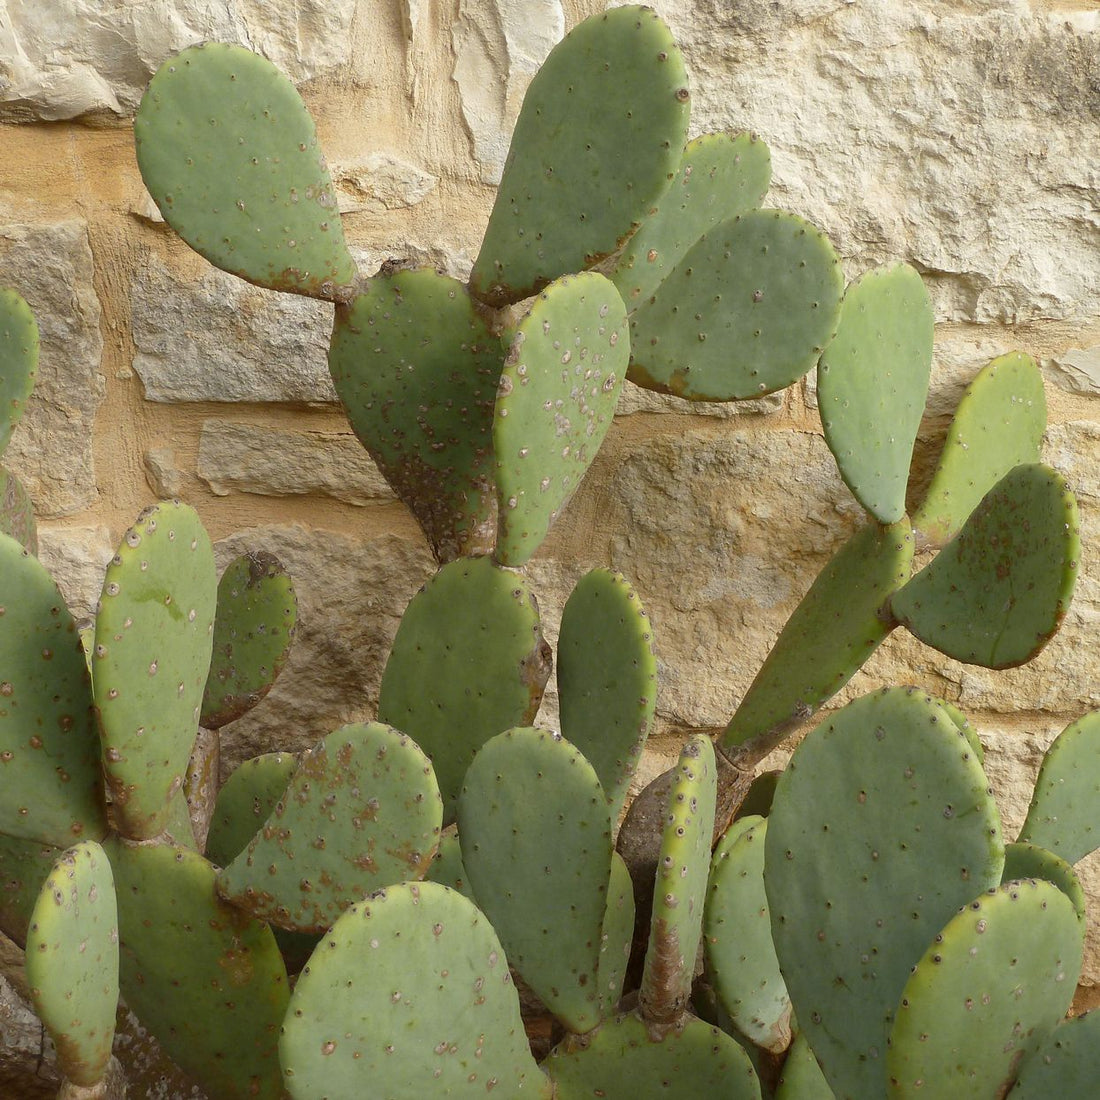 5 reasons why the Prickly Pear is such a super power hero for the skin